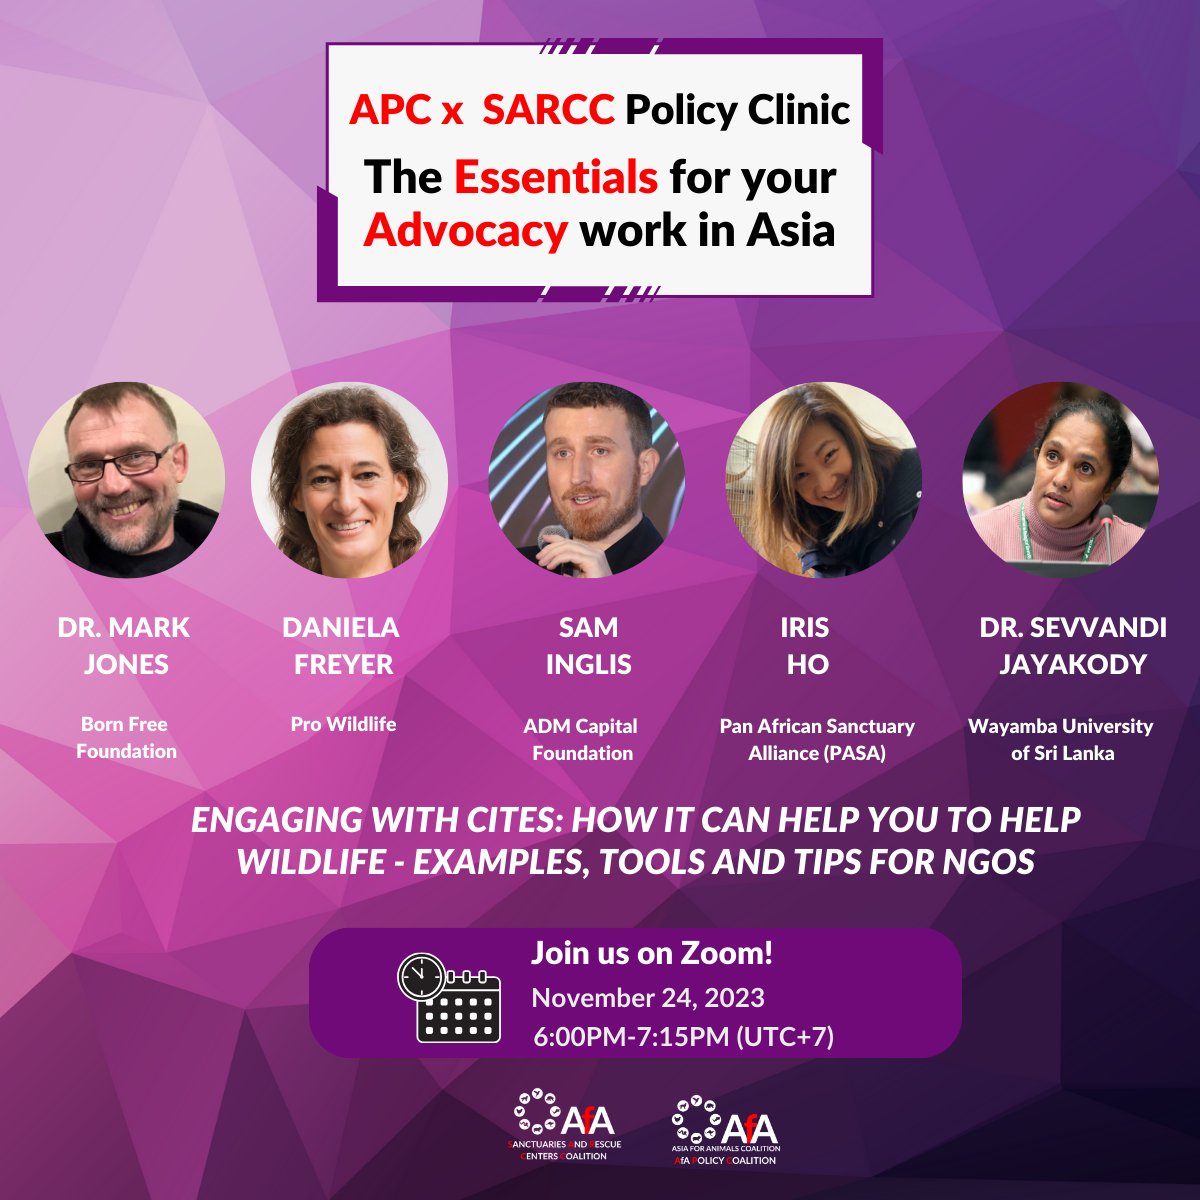 The APC Policy Clinic is back with panel discussion, 'Engaging with @CITES: How it can help you to help #wildlife - Examples, tools & tips for NGOs' 📅Nov 24 ⏲️7:00PM (HKT) 📕More info: tinyurl.com/yh4js3pw ✍️Register: asiaforanimals.com/policy-clinic-… #endangeredspecies #conservation